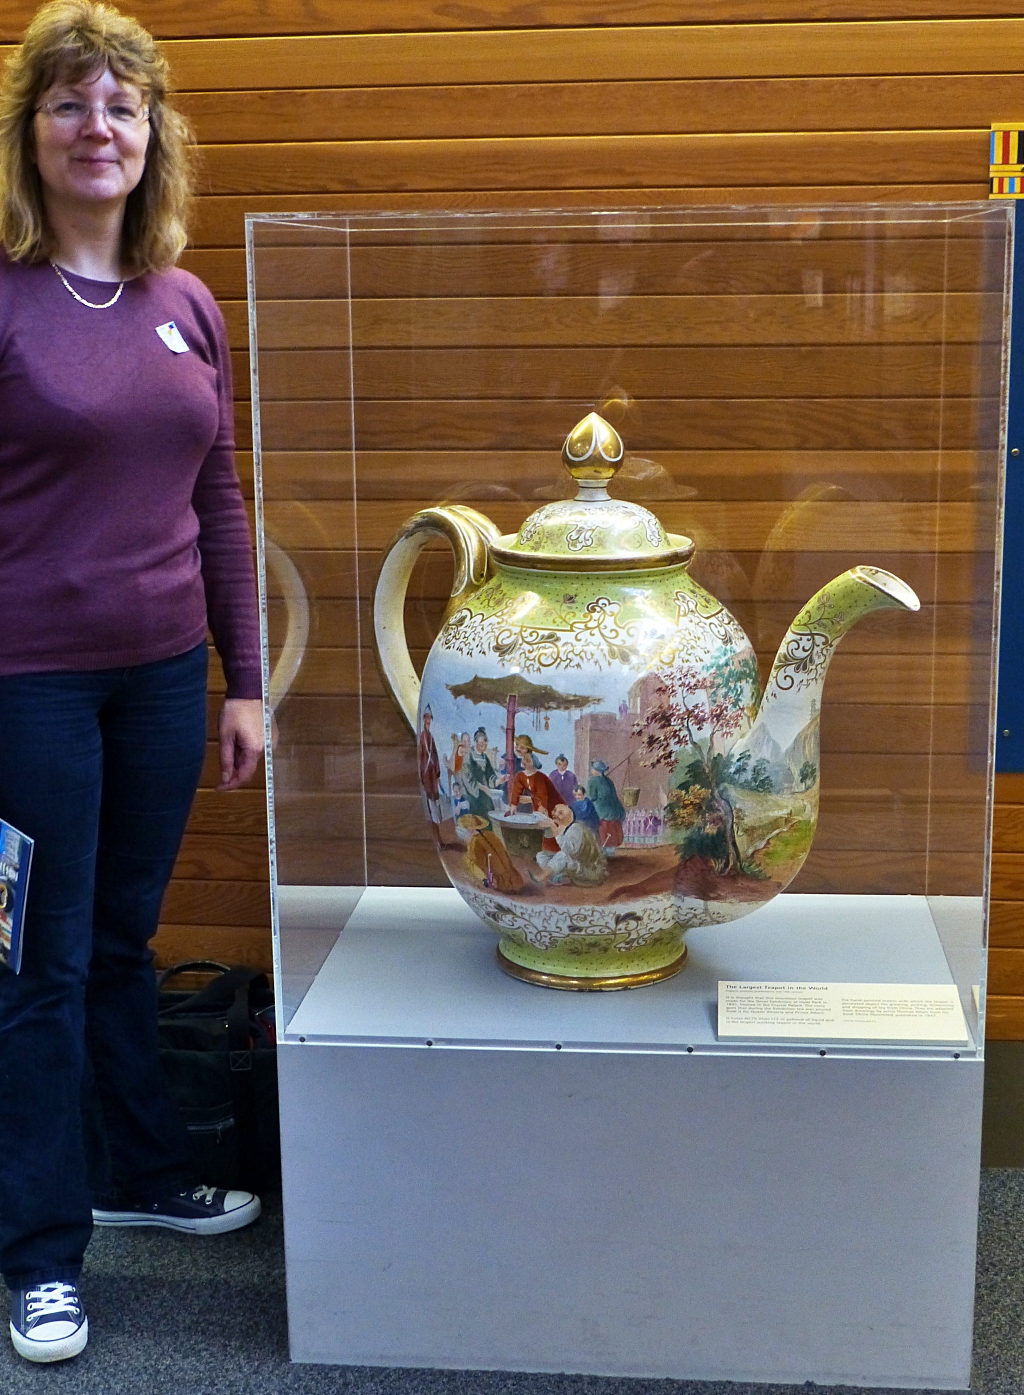 Was this the Largest Tea Pot in the World?